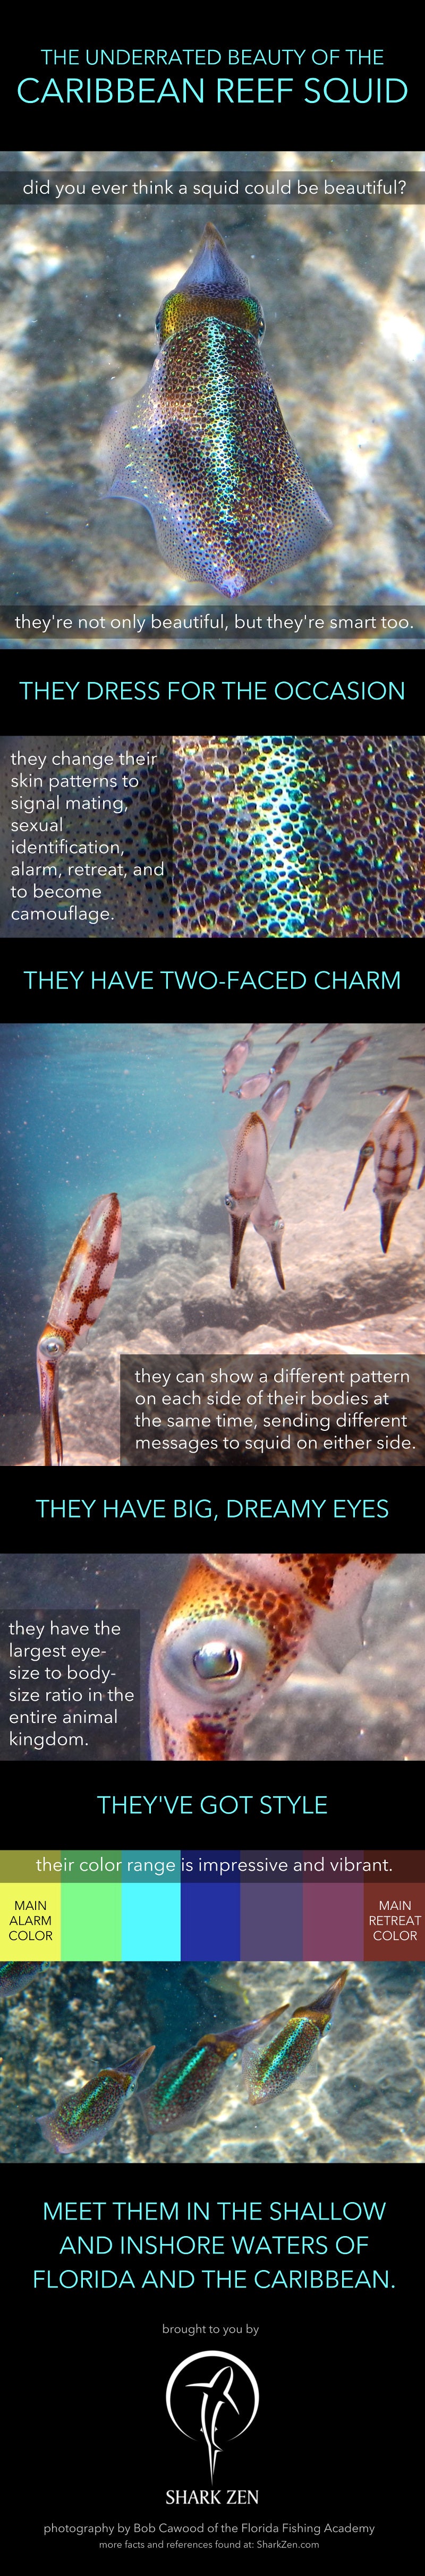 Caribbean Reef Squid Facts & Anatomy Infographic